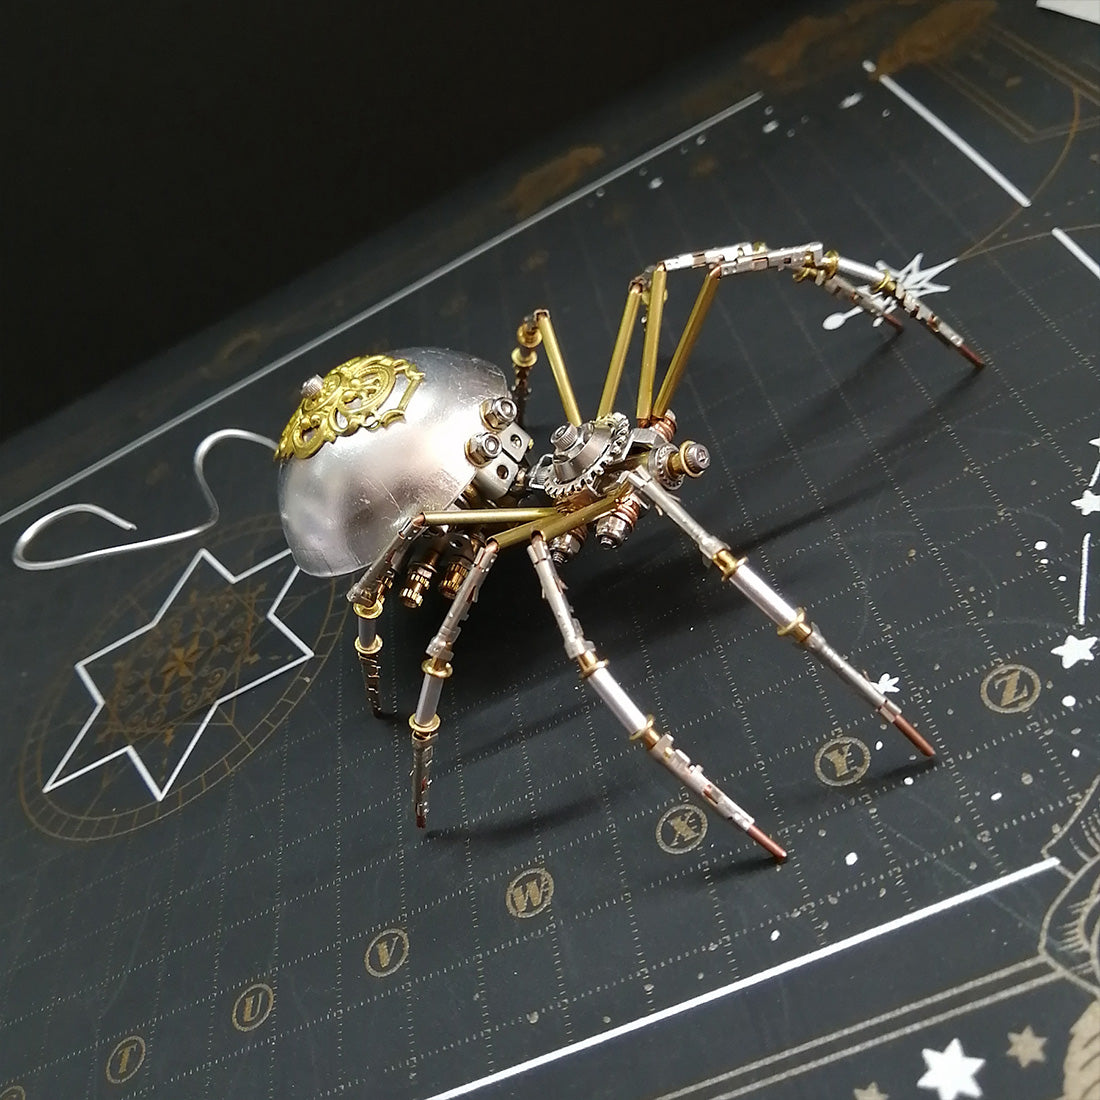 Mother Spider 3D Metal Model Building Kits Steampunk Insect